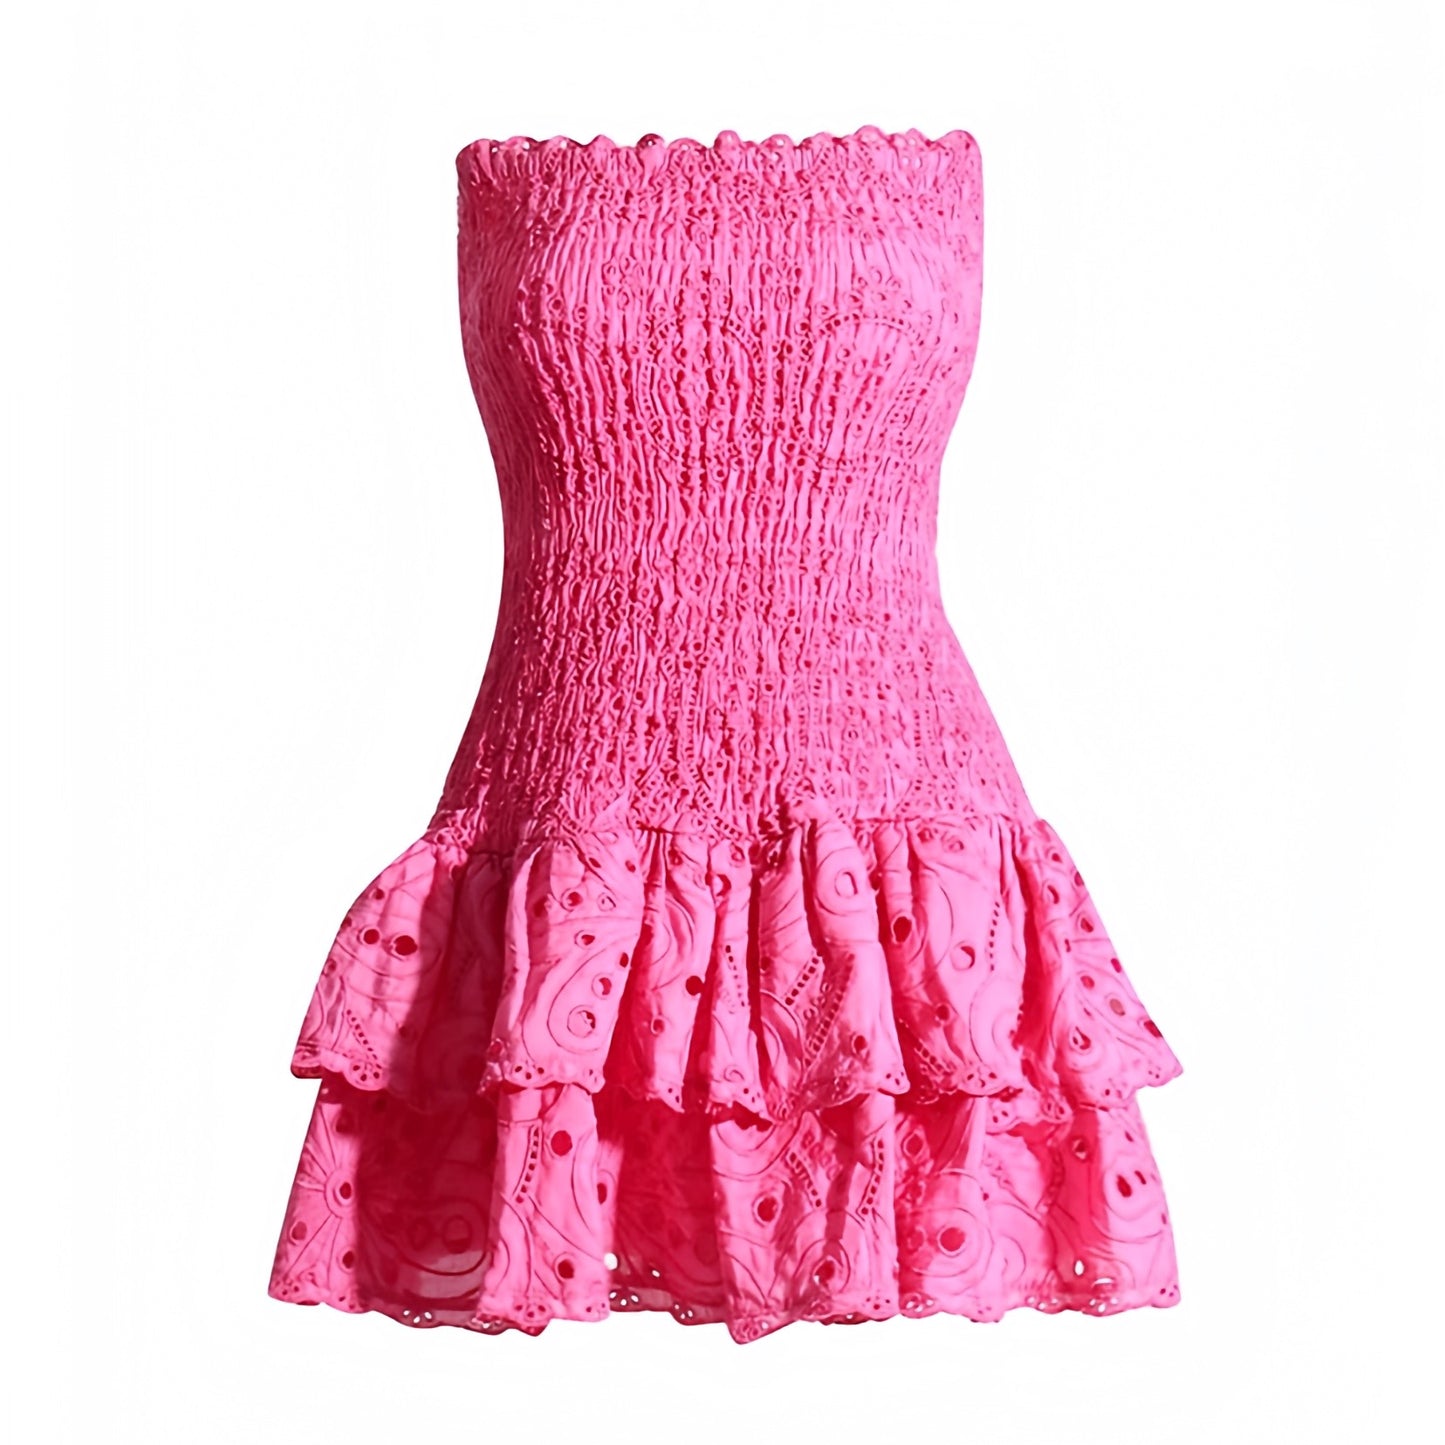 hot-pink-eyelet-embroidered-patterned-layered-ruffle-trim-smocked-slim-fit-bodycon-fitted-bodice-drop-waist-shirred-scaloped-strapless-bandeau-sleeveless-short-mini-dress-couture-ball-gown-women-ladies-chic-trendy-spring-2024-summer-elegant-semi-formal-casual-classy-feminine-prom-party-gala-preppy-style-debutante-tropical-european-vacation-beach-wear-sundress-revolve-charo-ruiz-loveshackfancy-zimmerman-altard-state-dupe